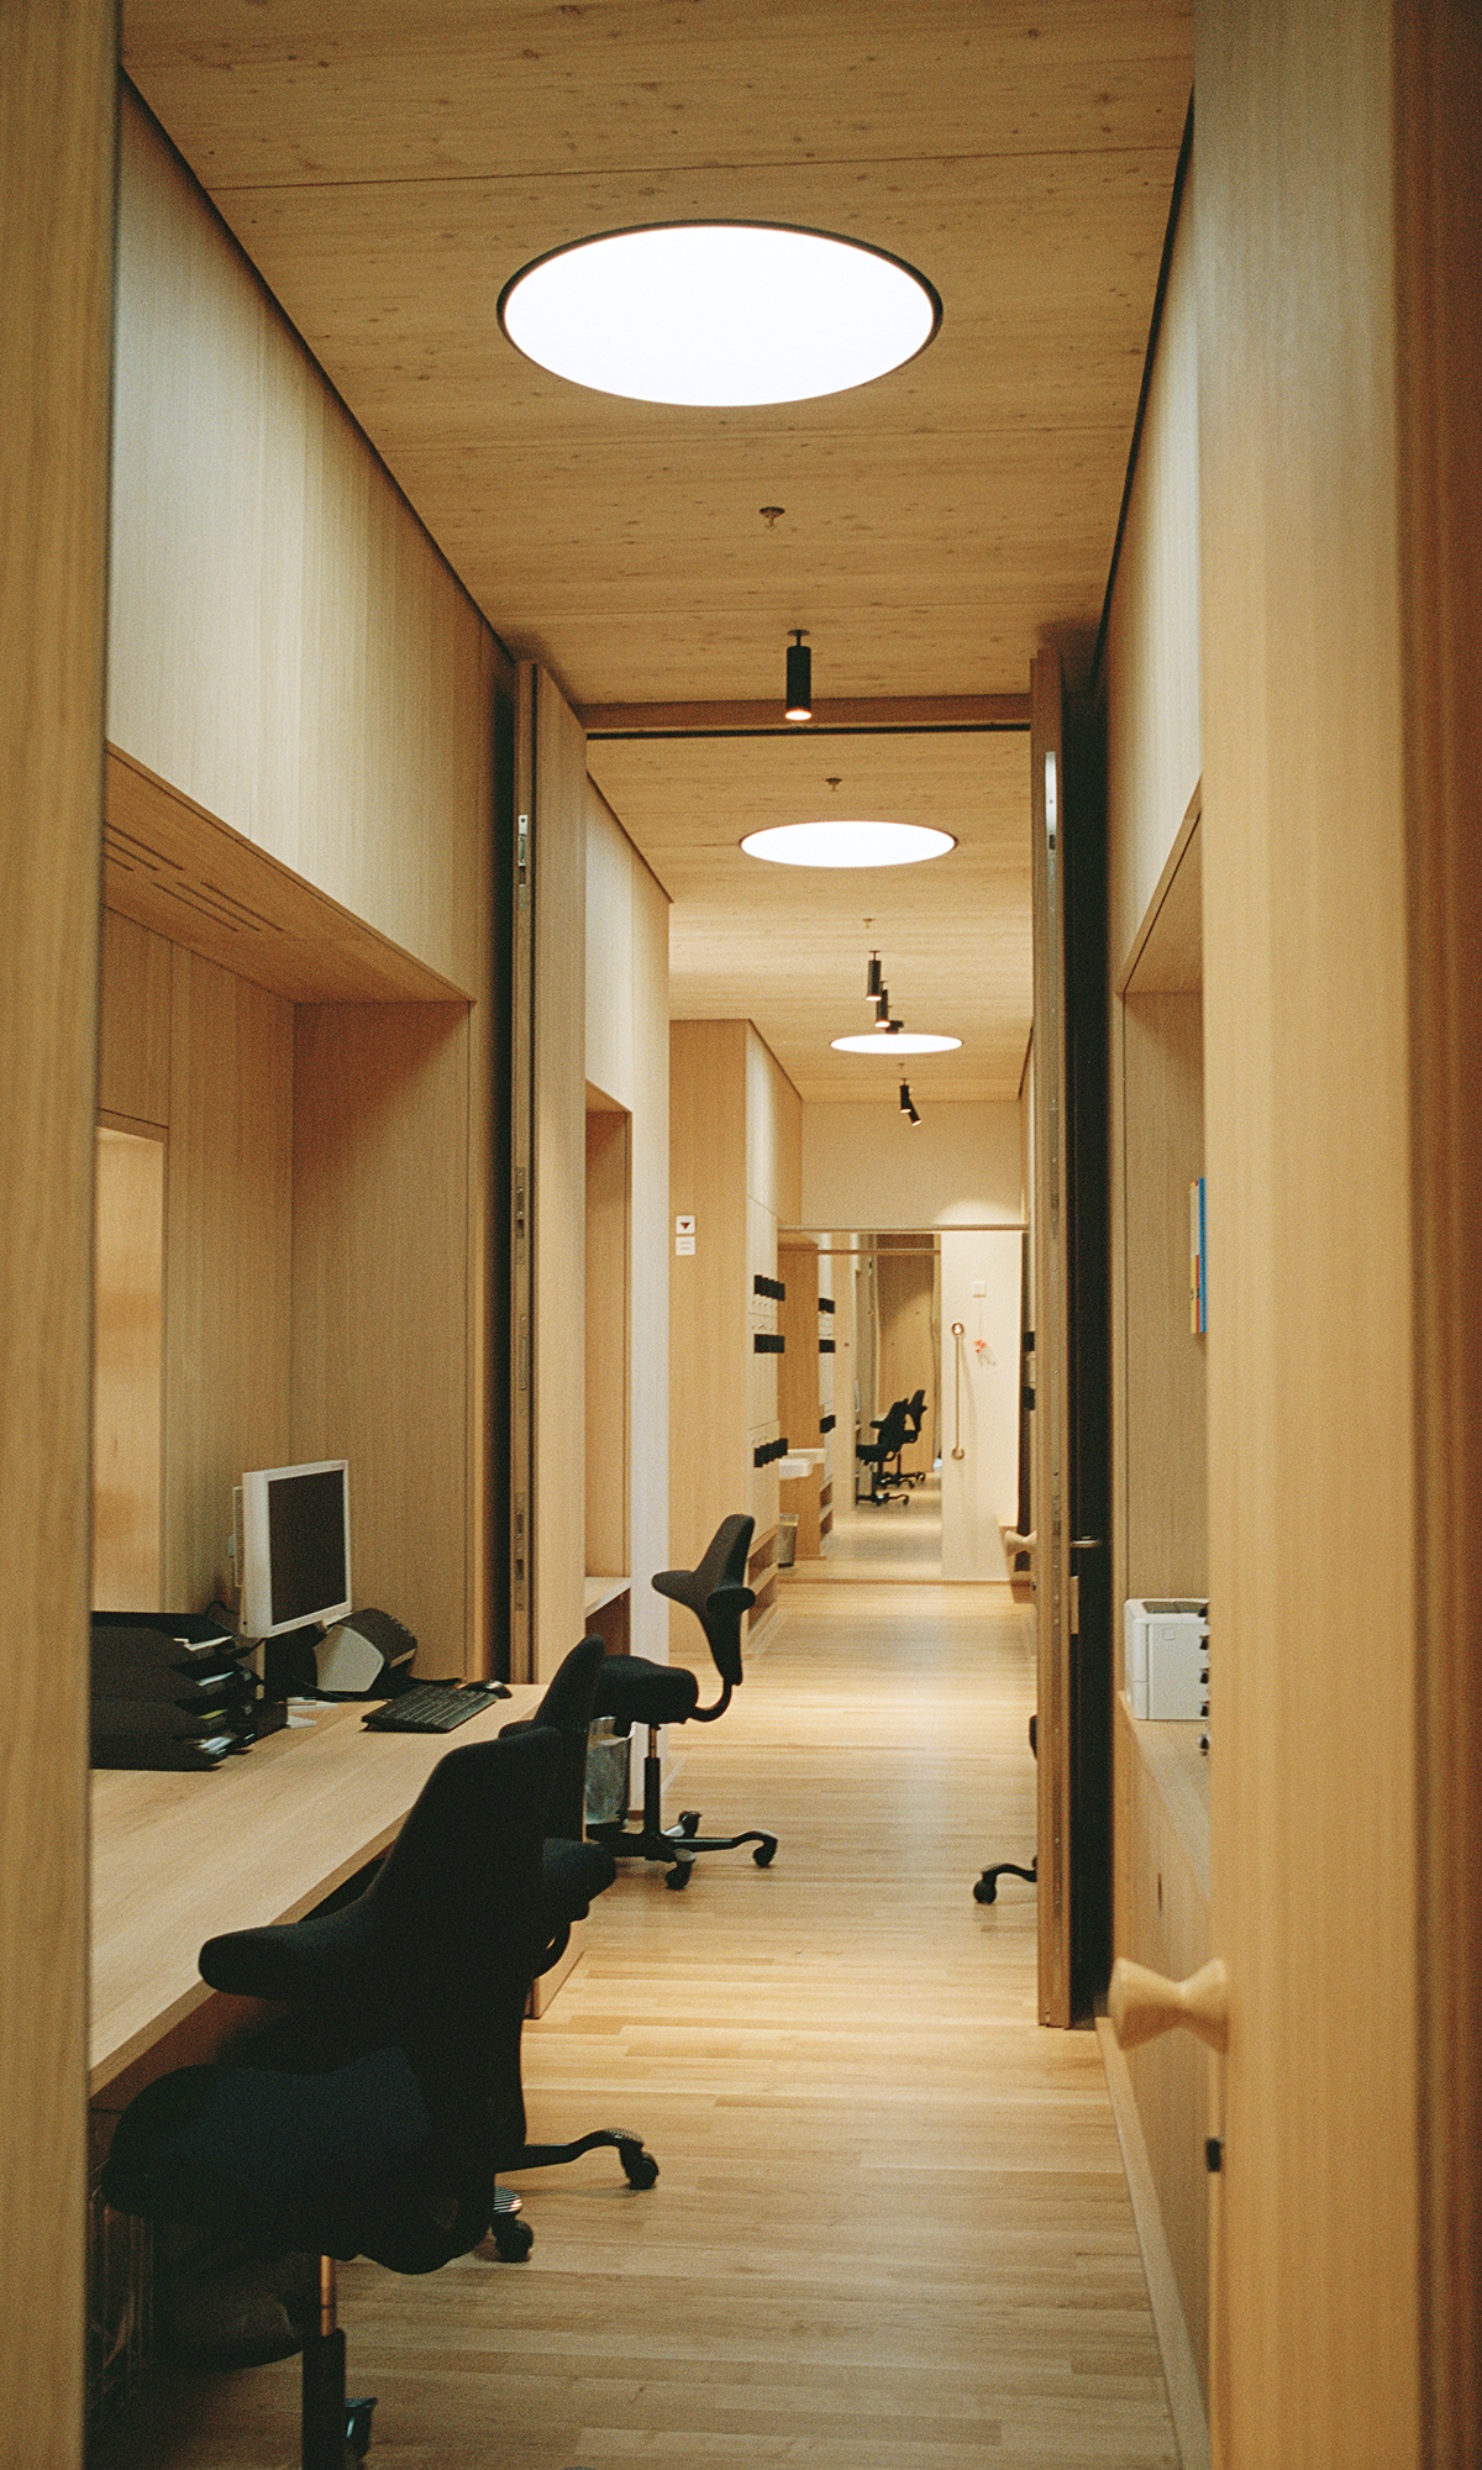 Workstations are arranged side by side in the elongated offices. 